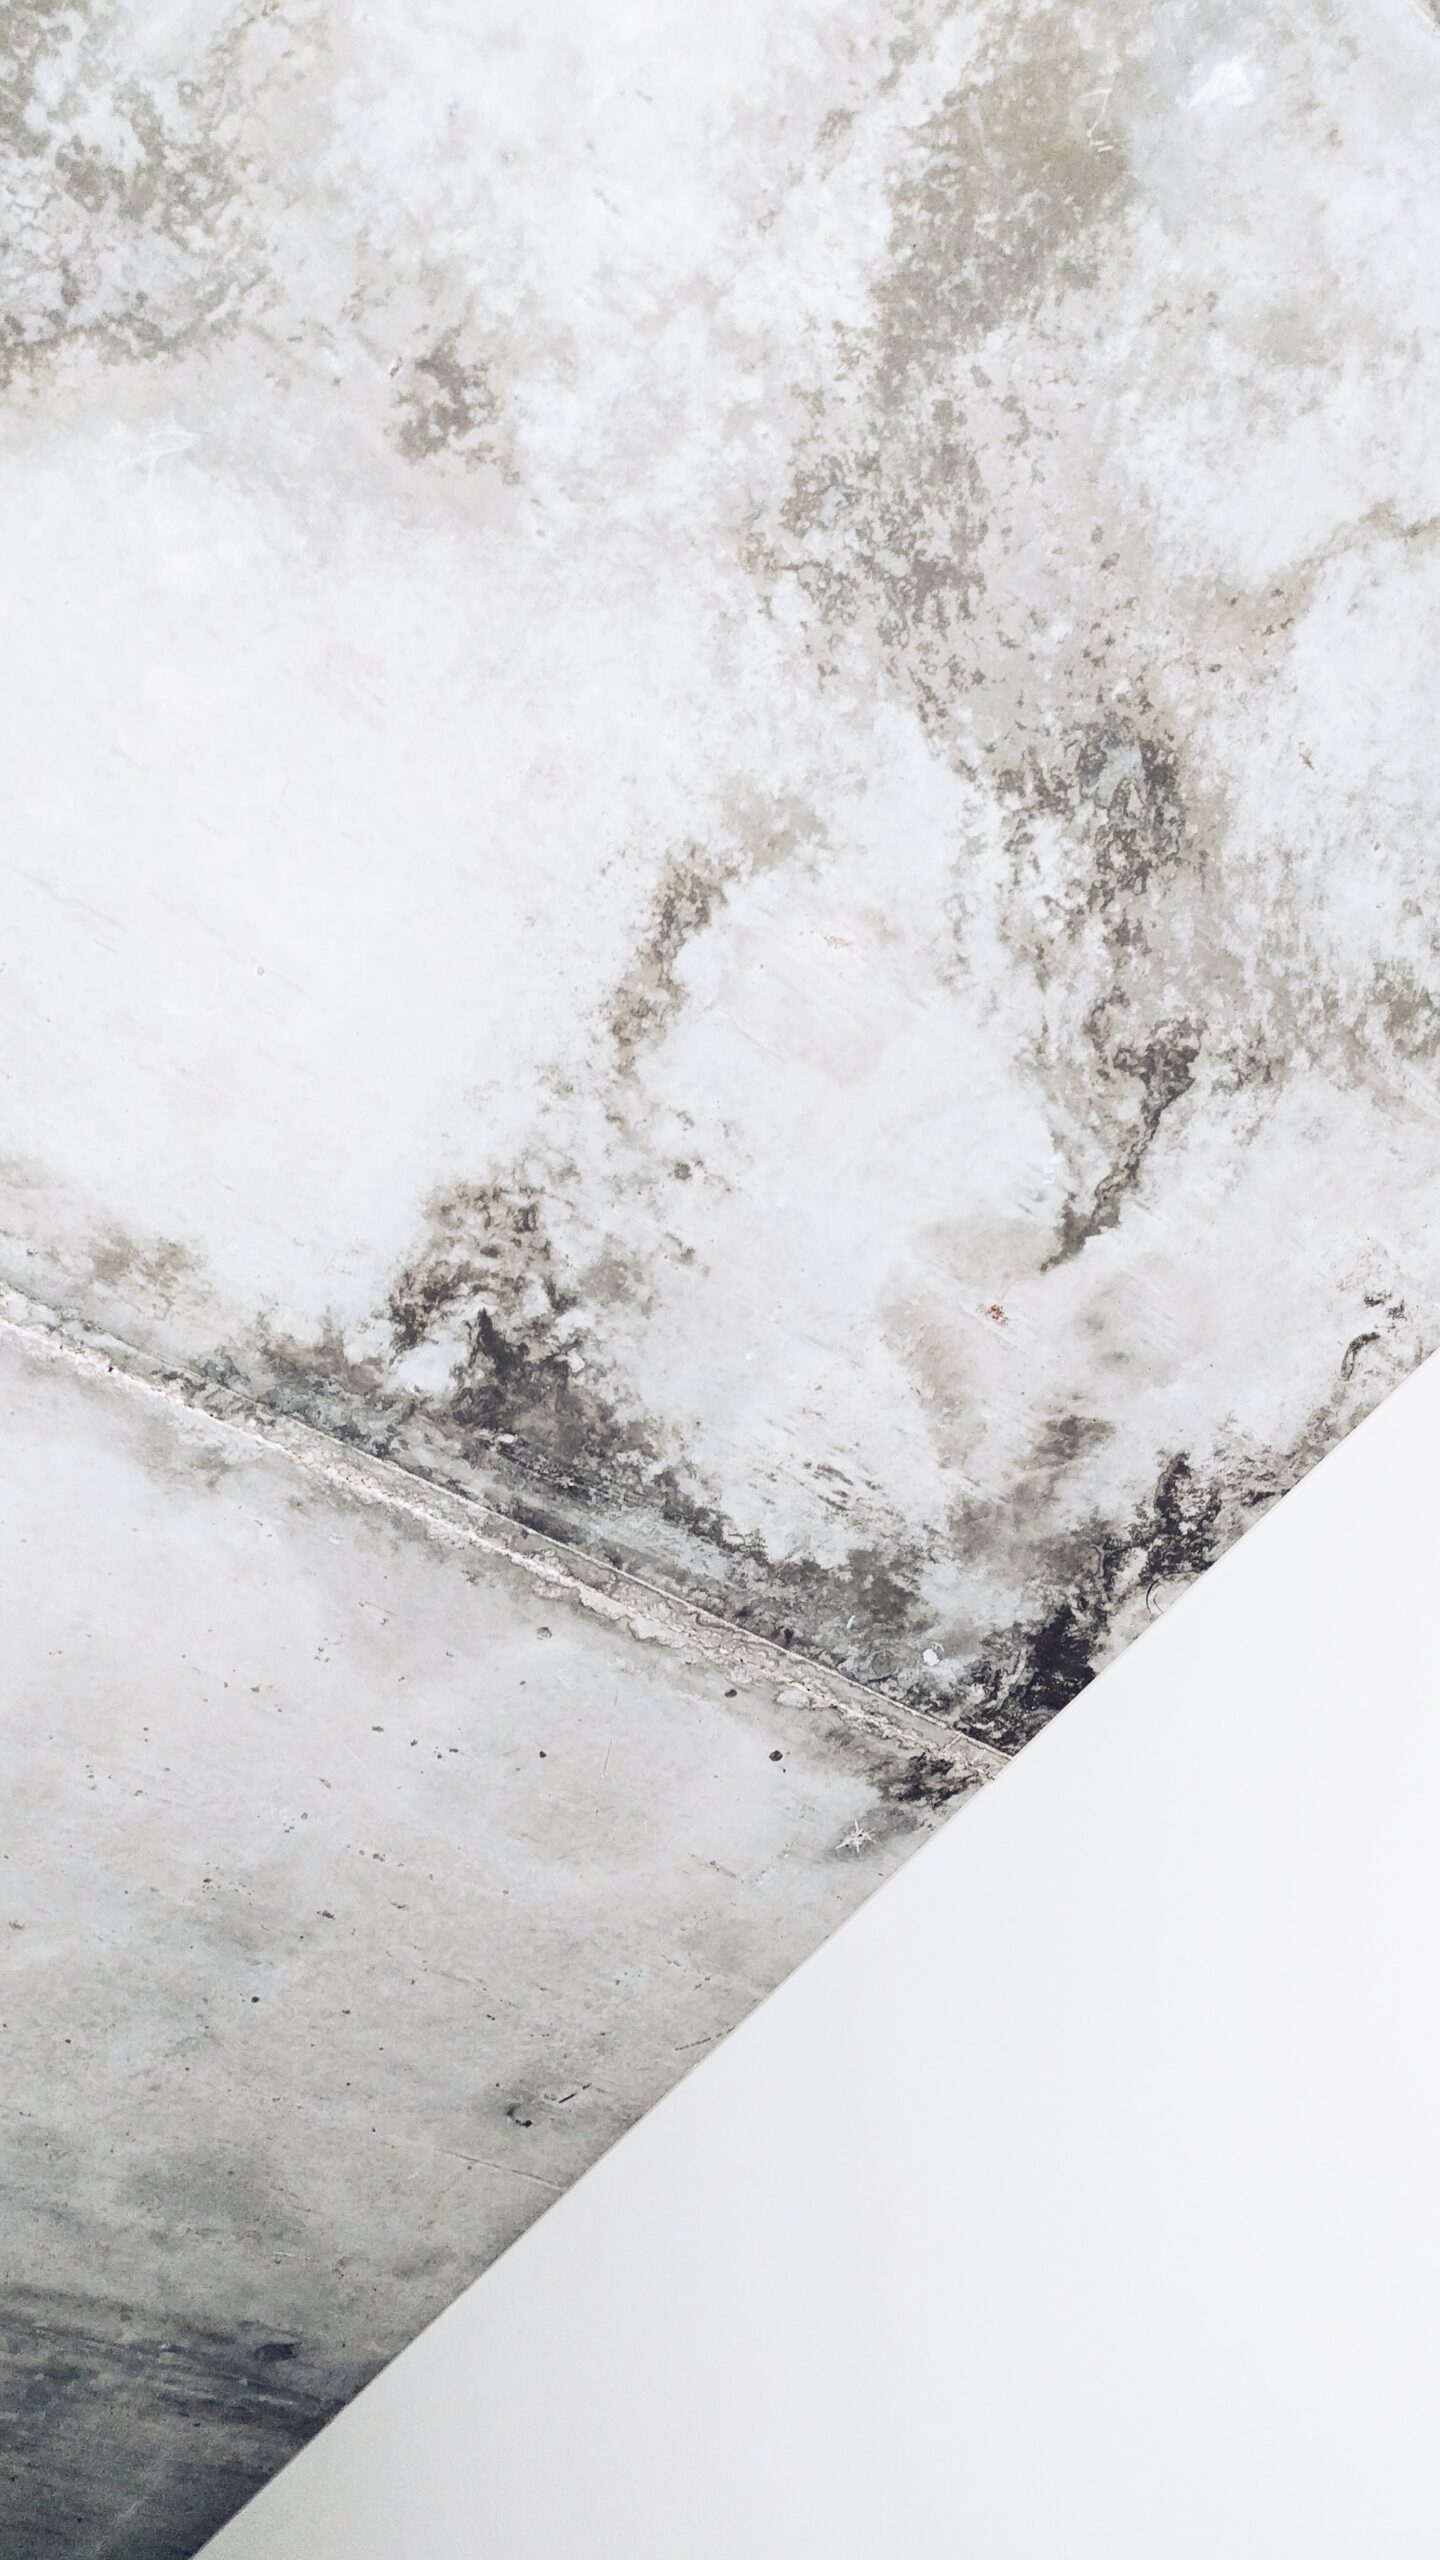 Mythbusters: Breaking Down the Myths About Mold Damage